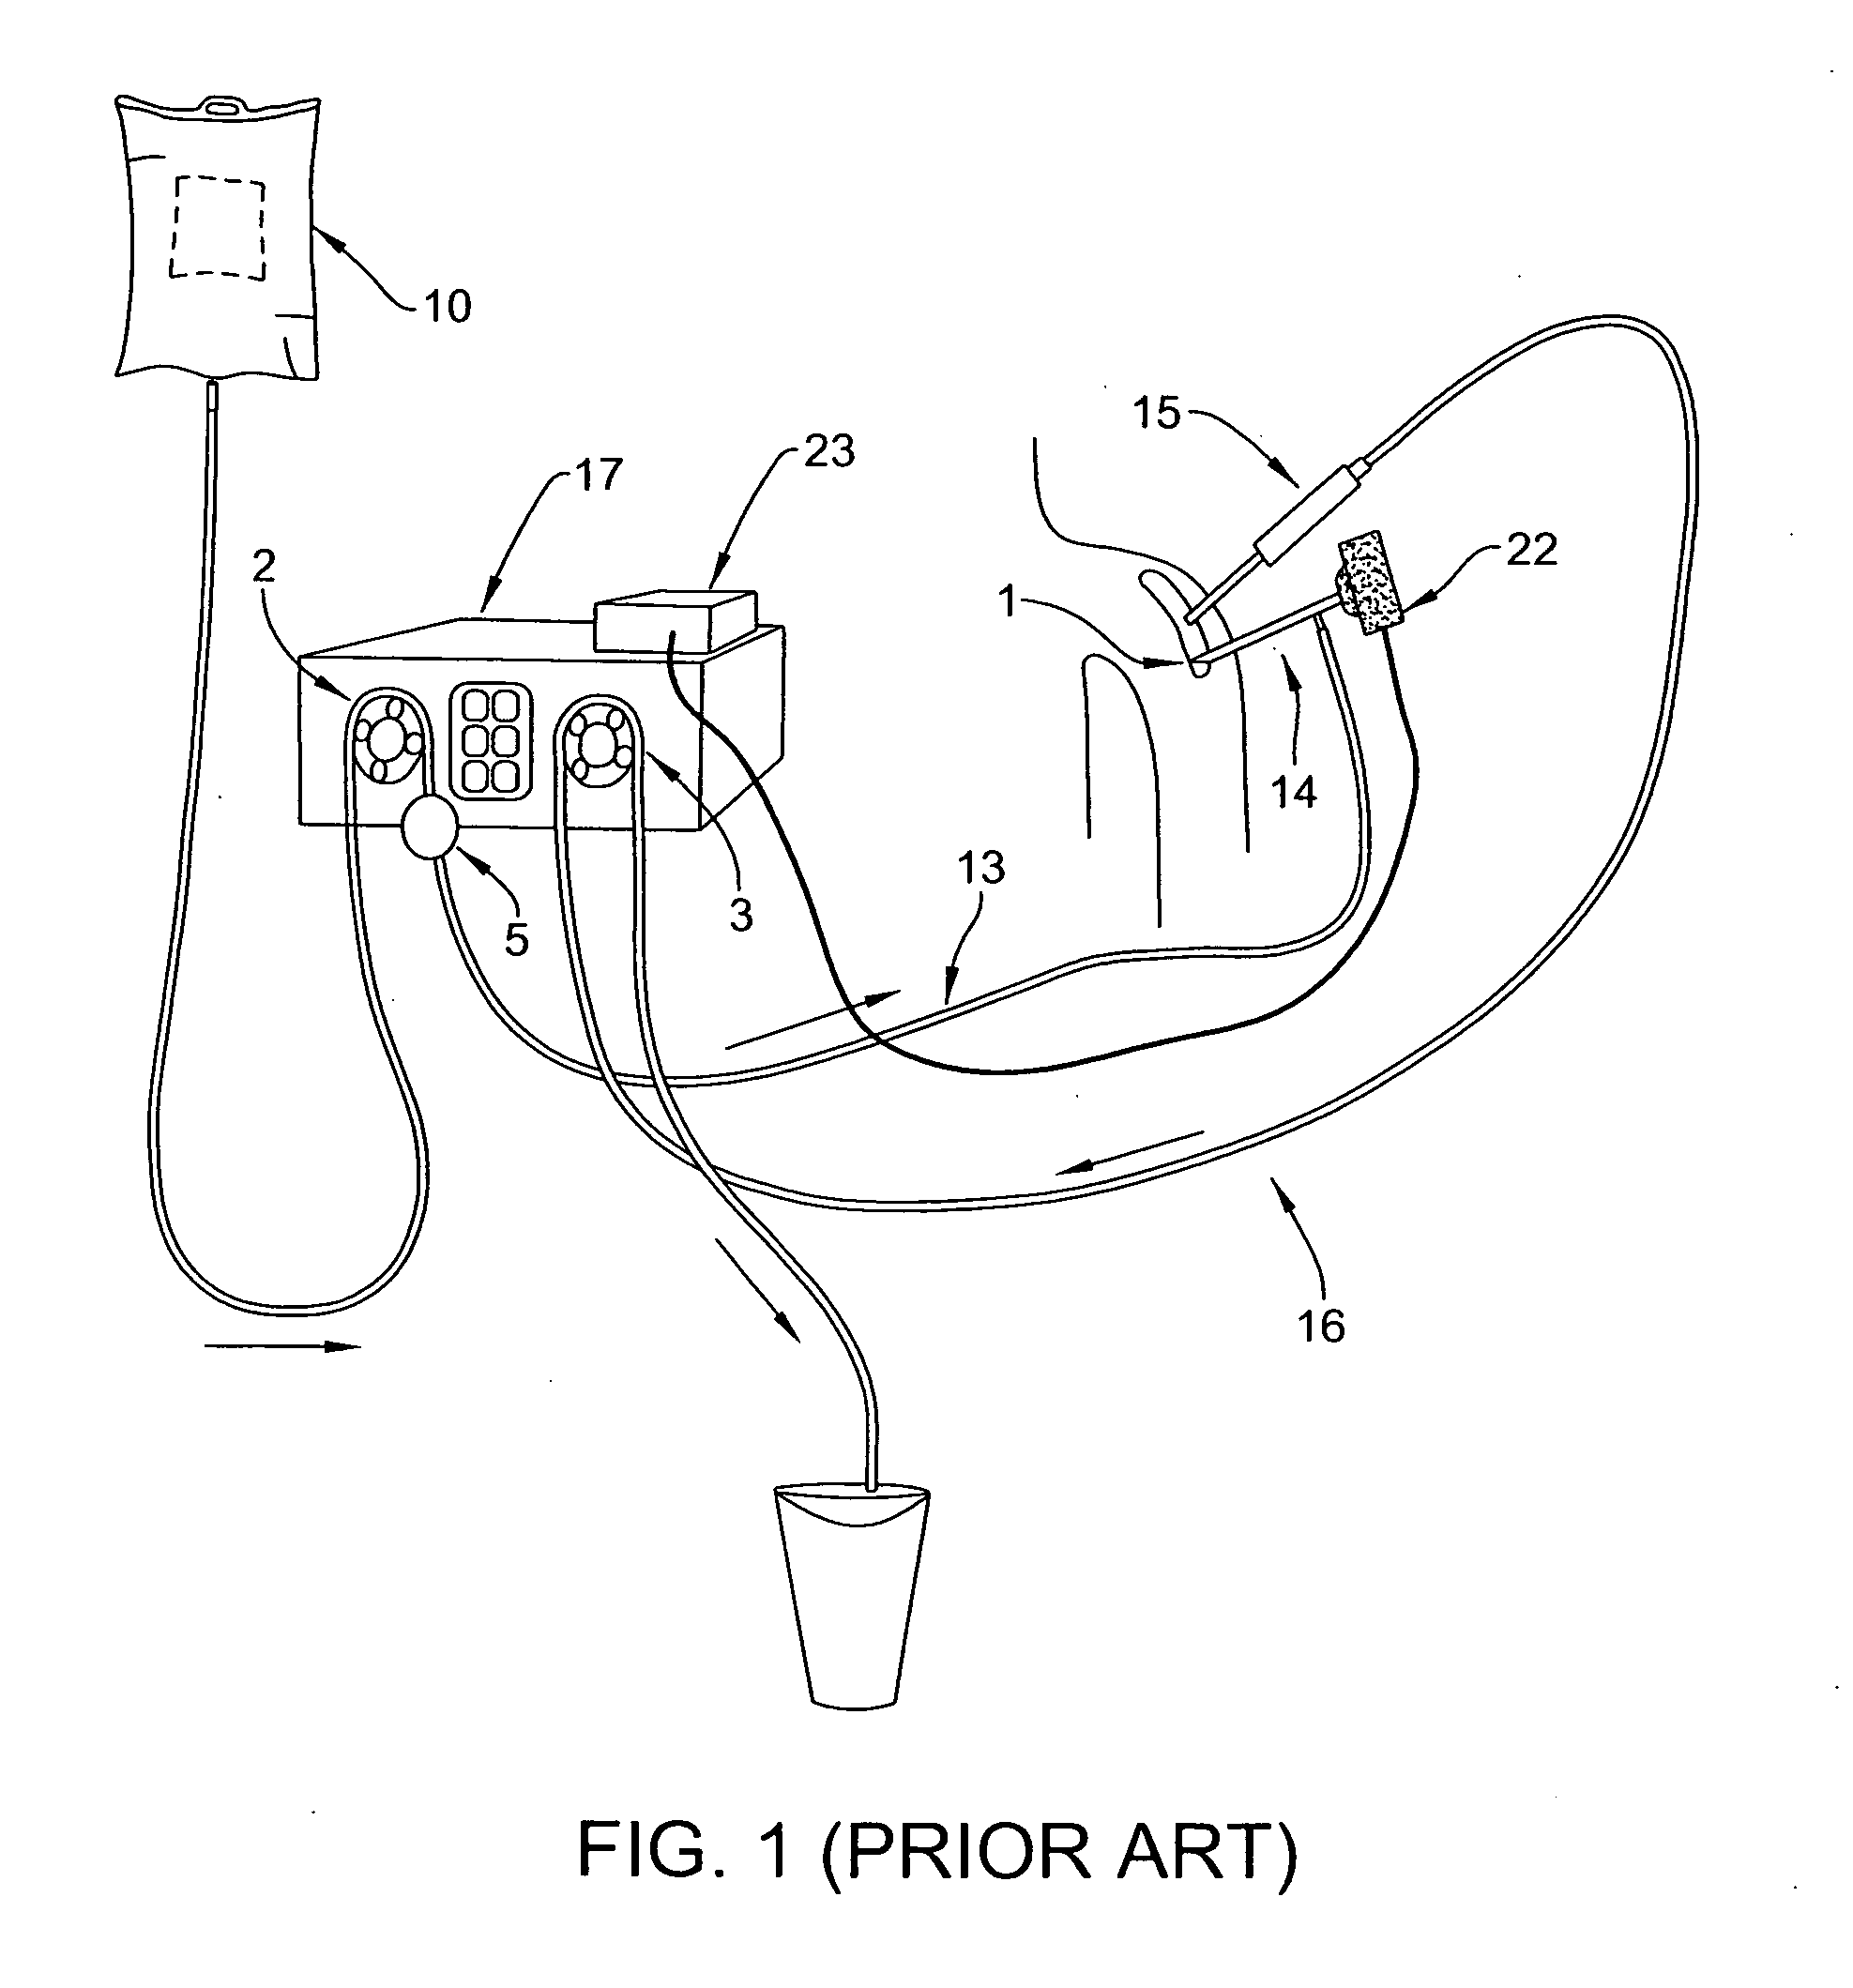 Method and system for video based image detection/identification analysis for fluid and visualization control